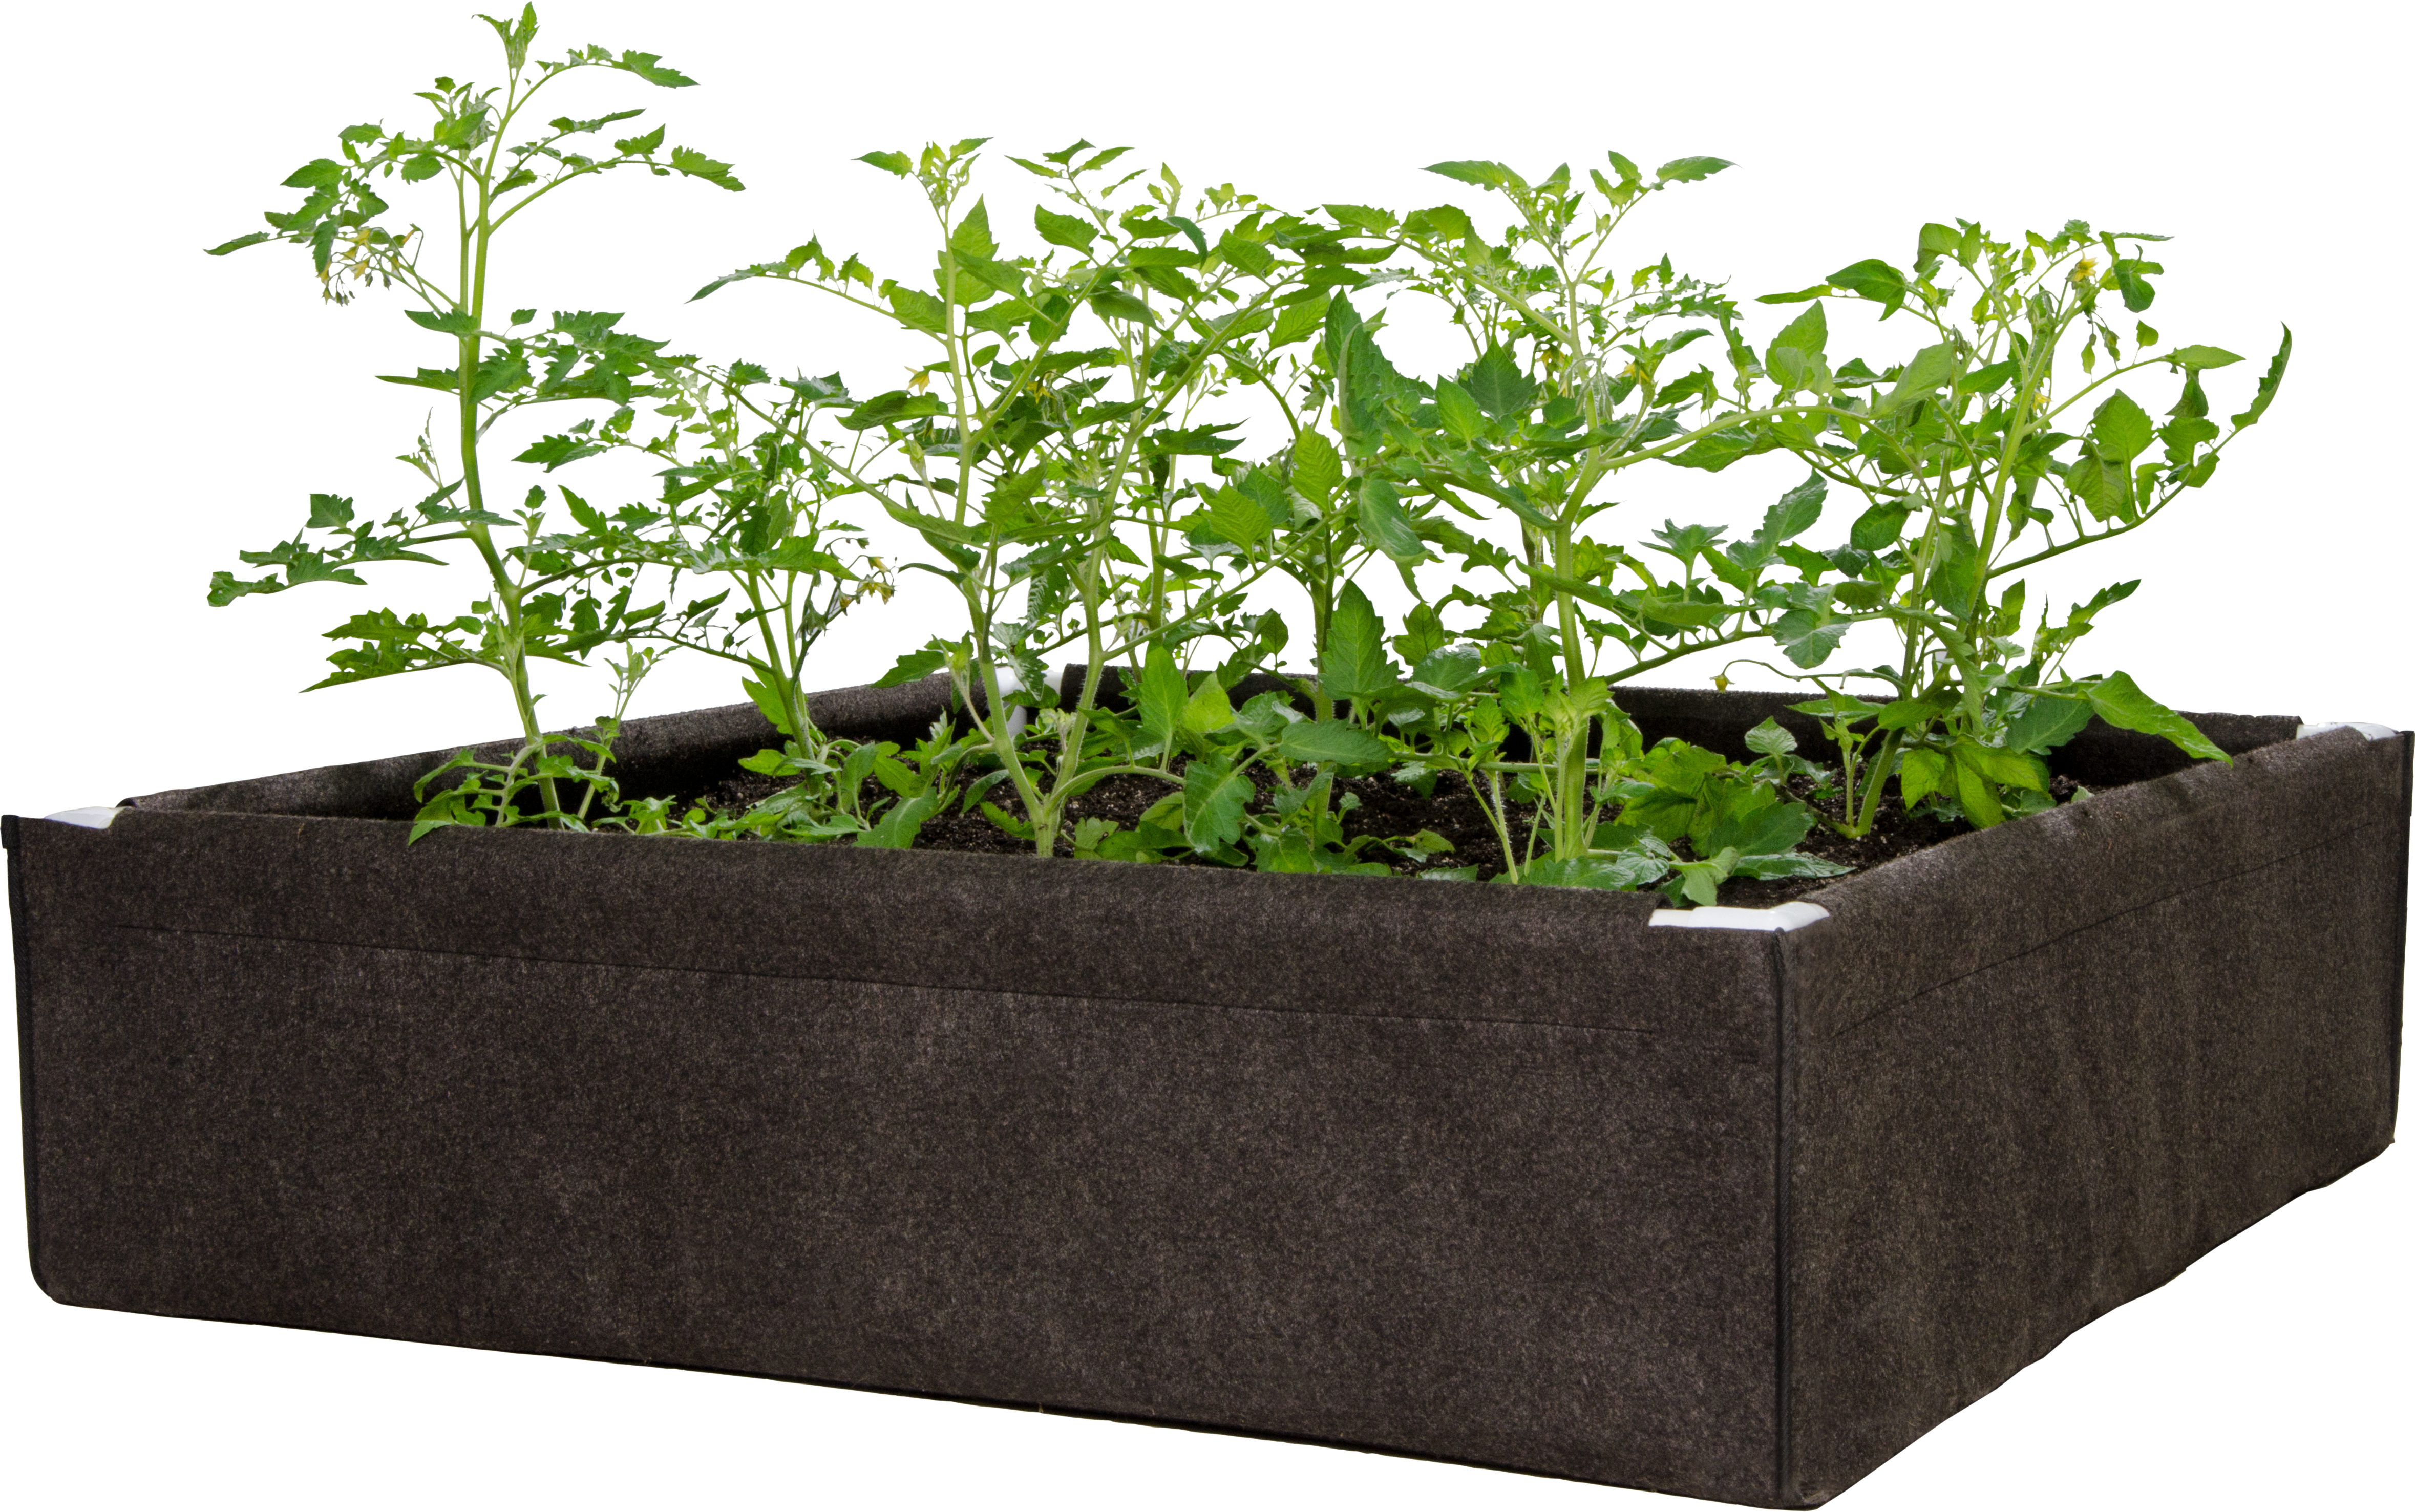 Picture for Dirt Pot Box, 4' x 4' Raised Bed